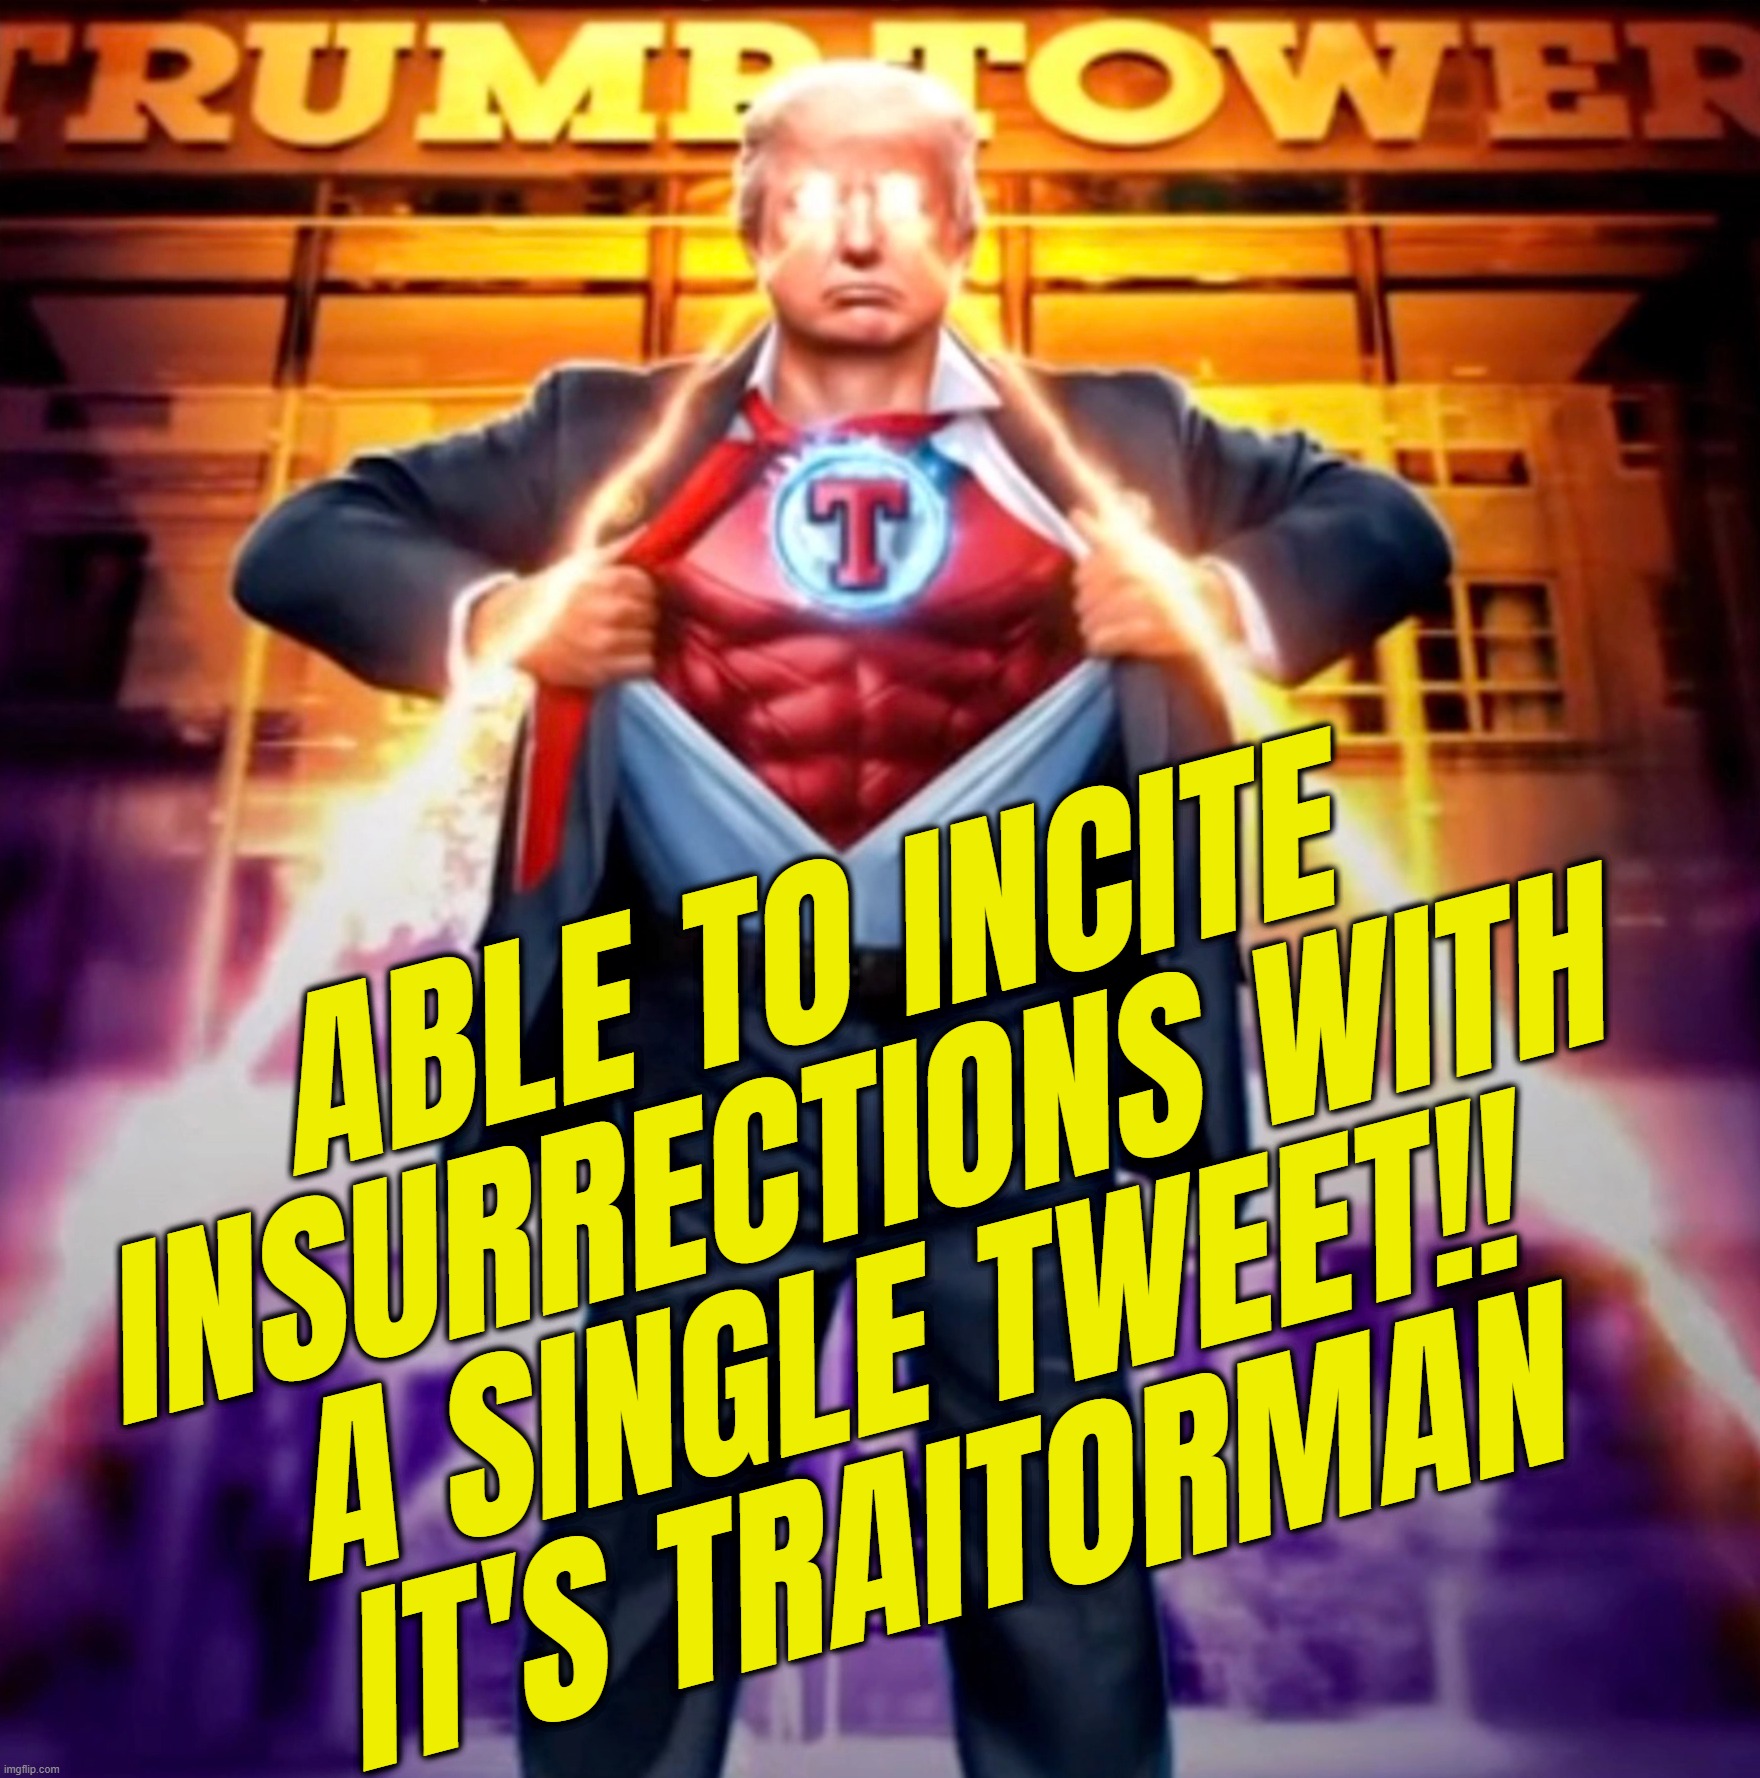 TRAITORMAN!! | ABLE TO INCITE
INSURRECTIONS WITH
A SINGLE TWEET!!
IT'S TRAITORMAN | image tagged in traitor,man | made w/ Imgflip meme maker